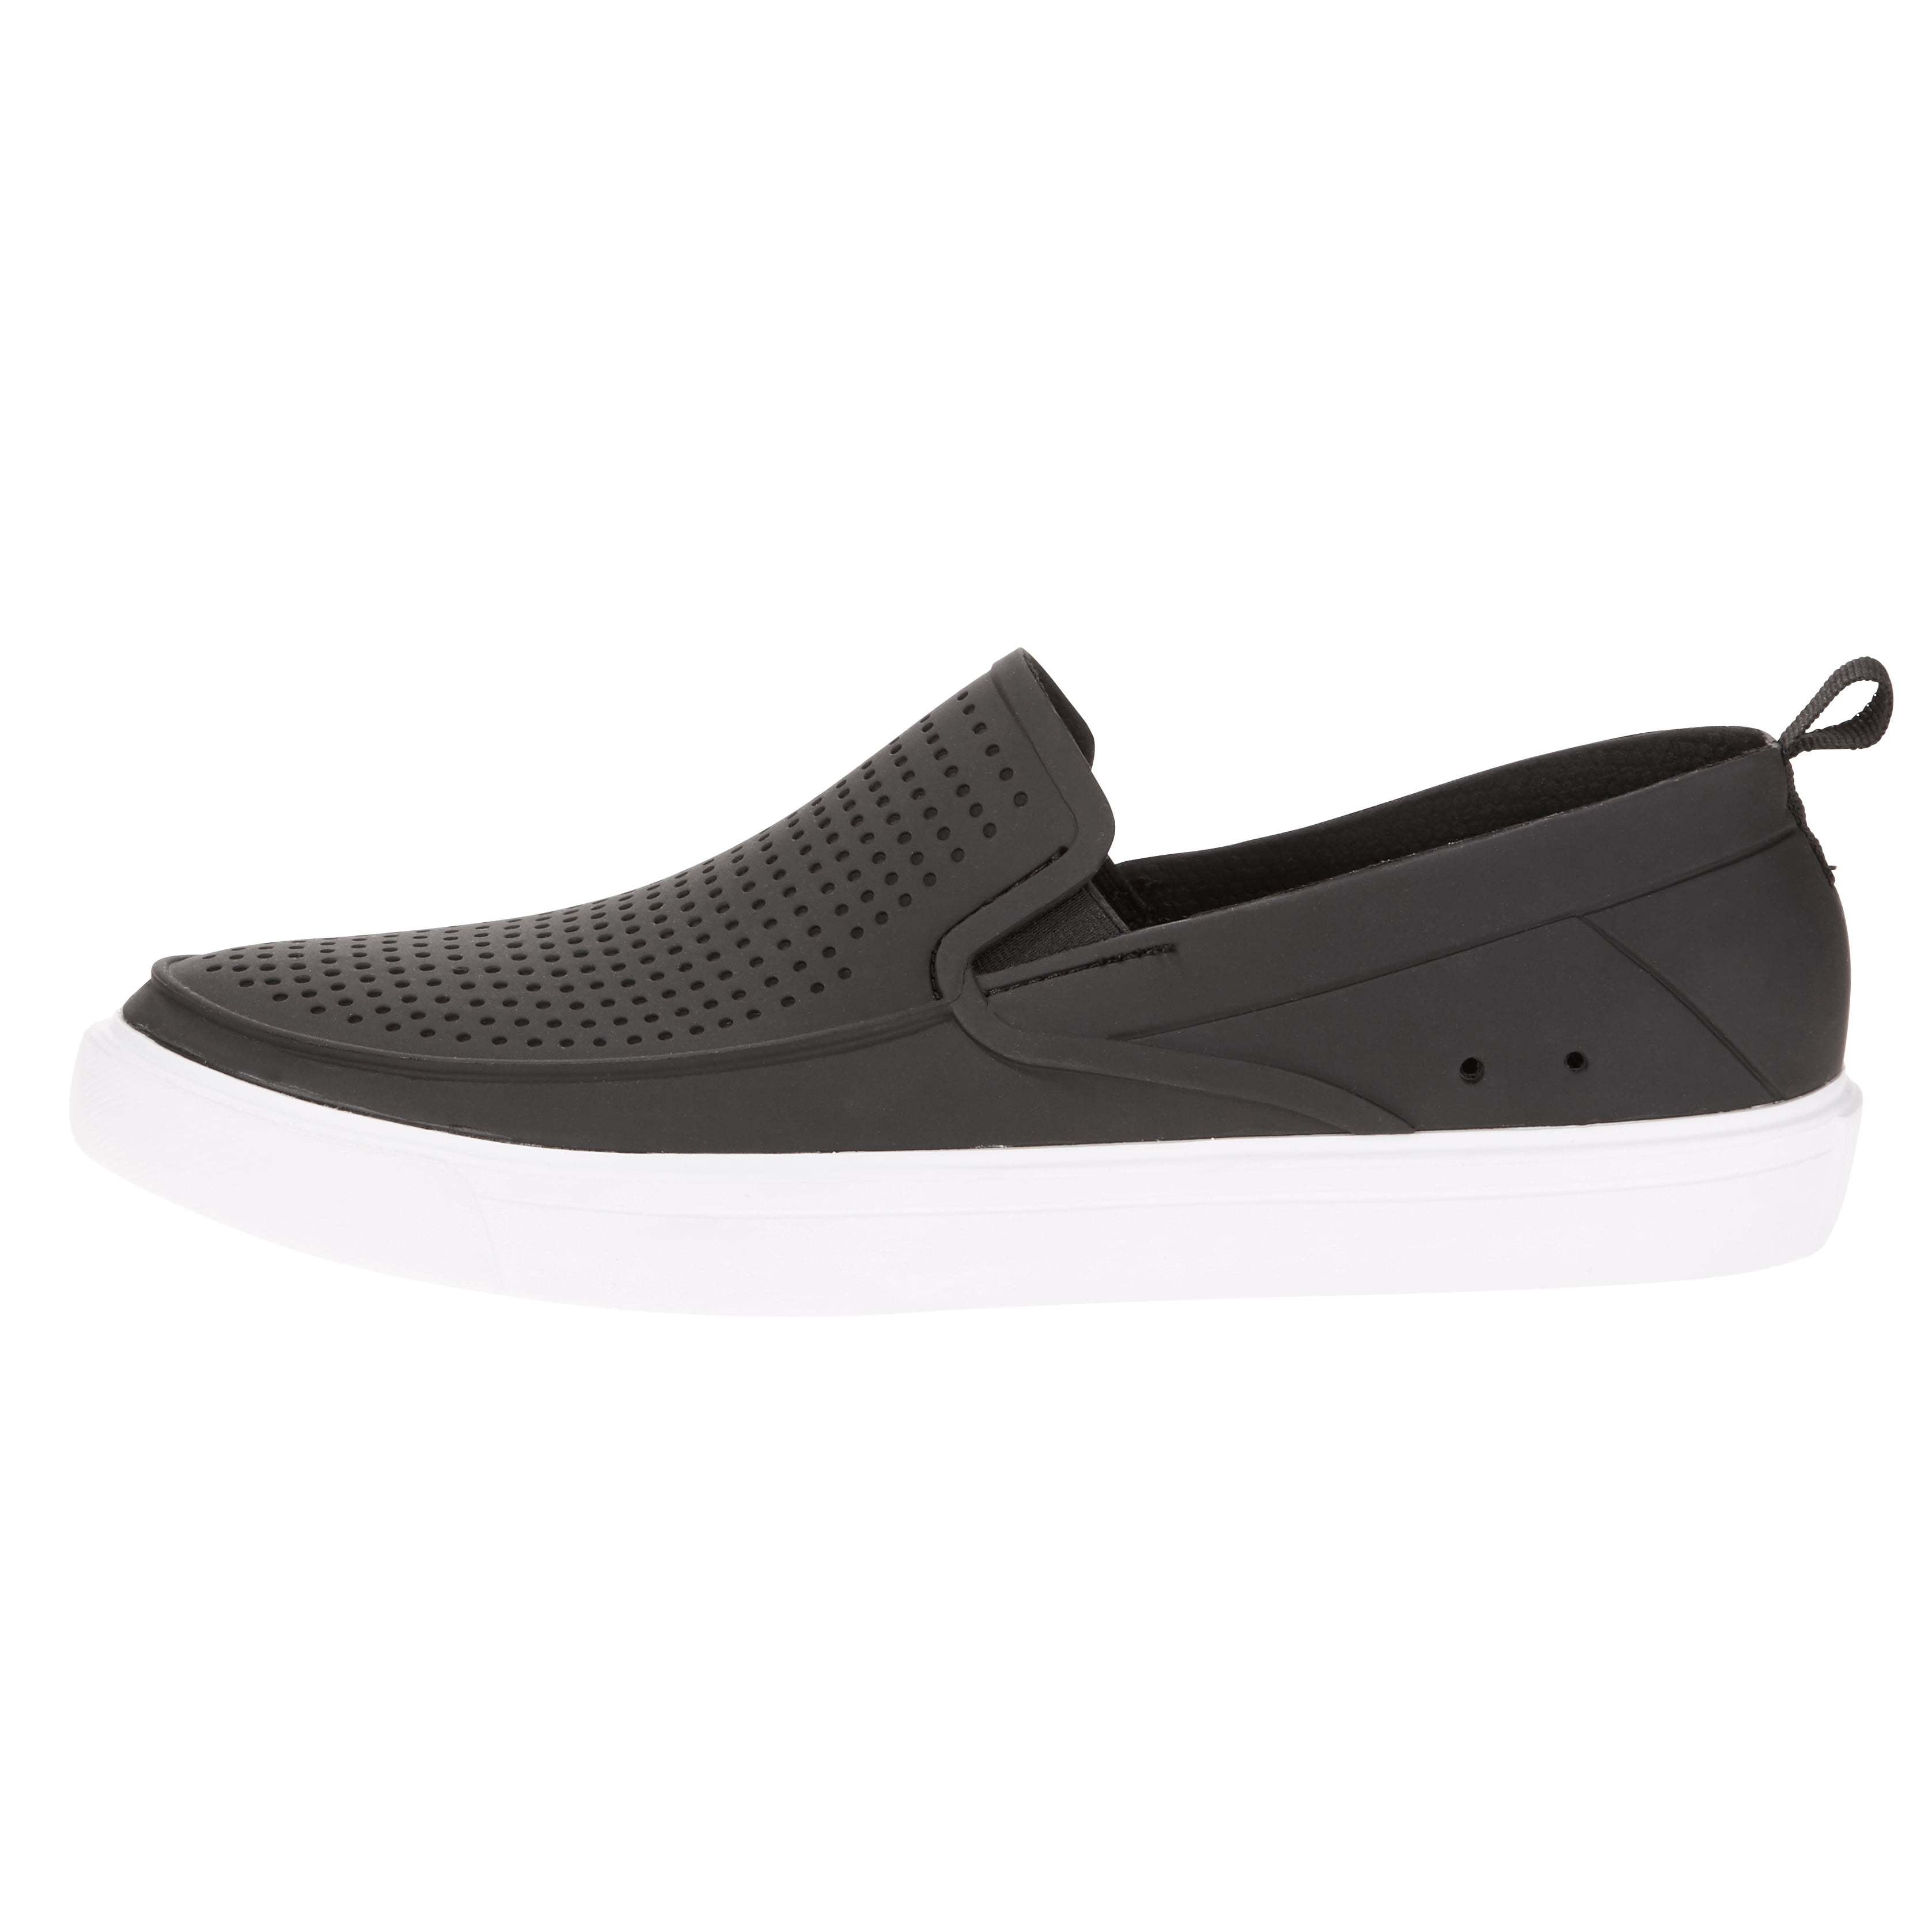 George Men's Casual Perforated Slip-On 